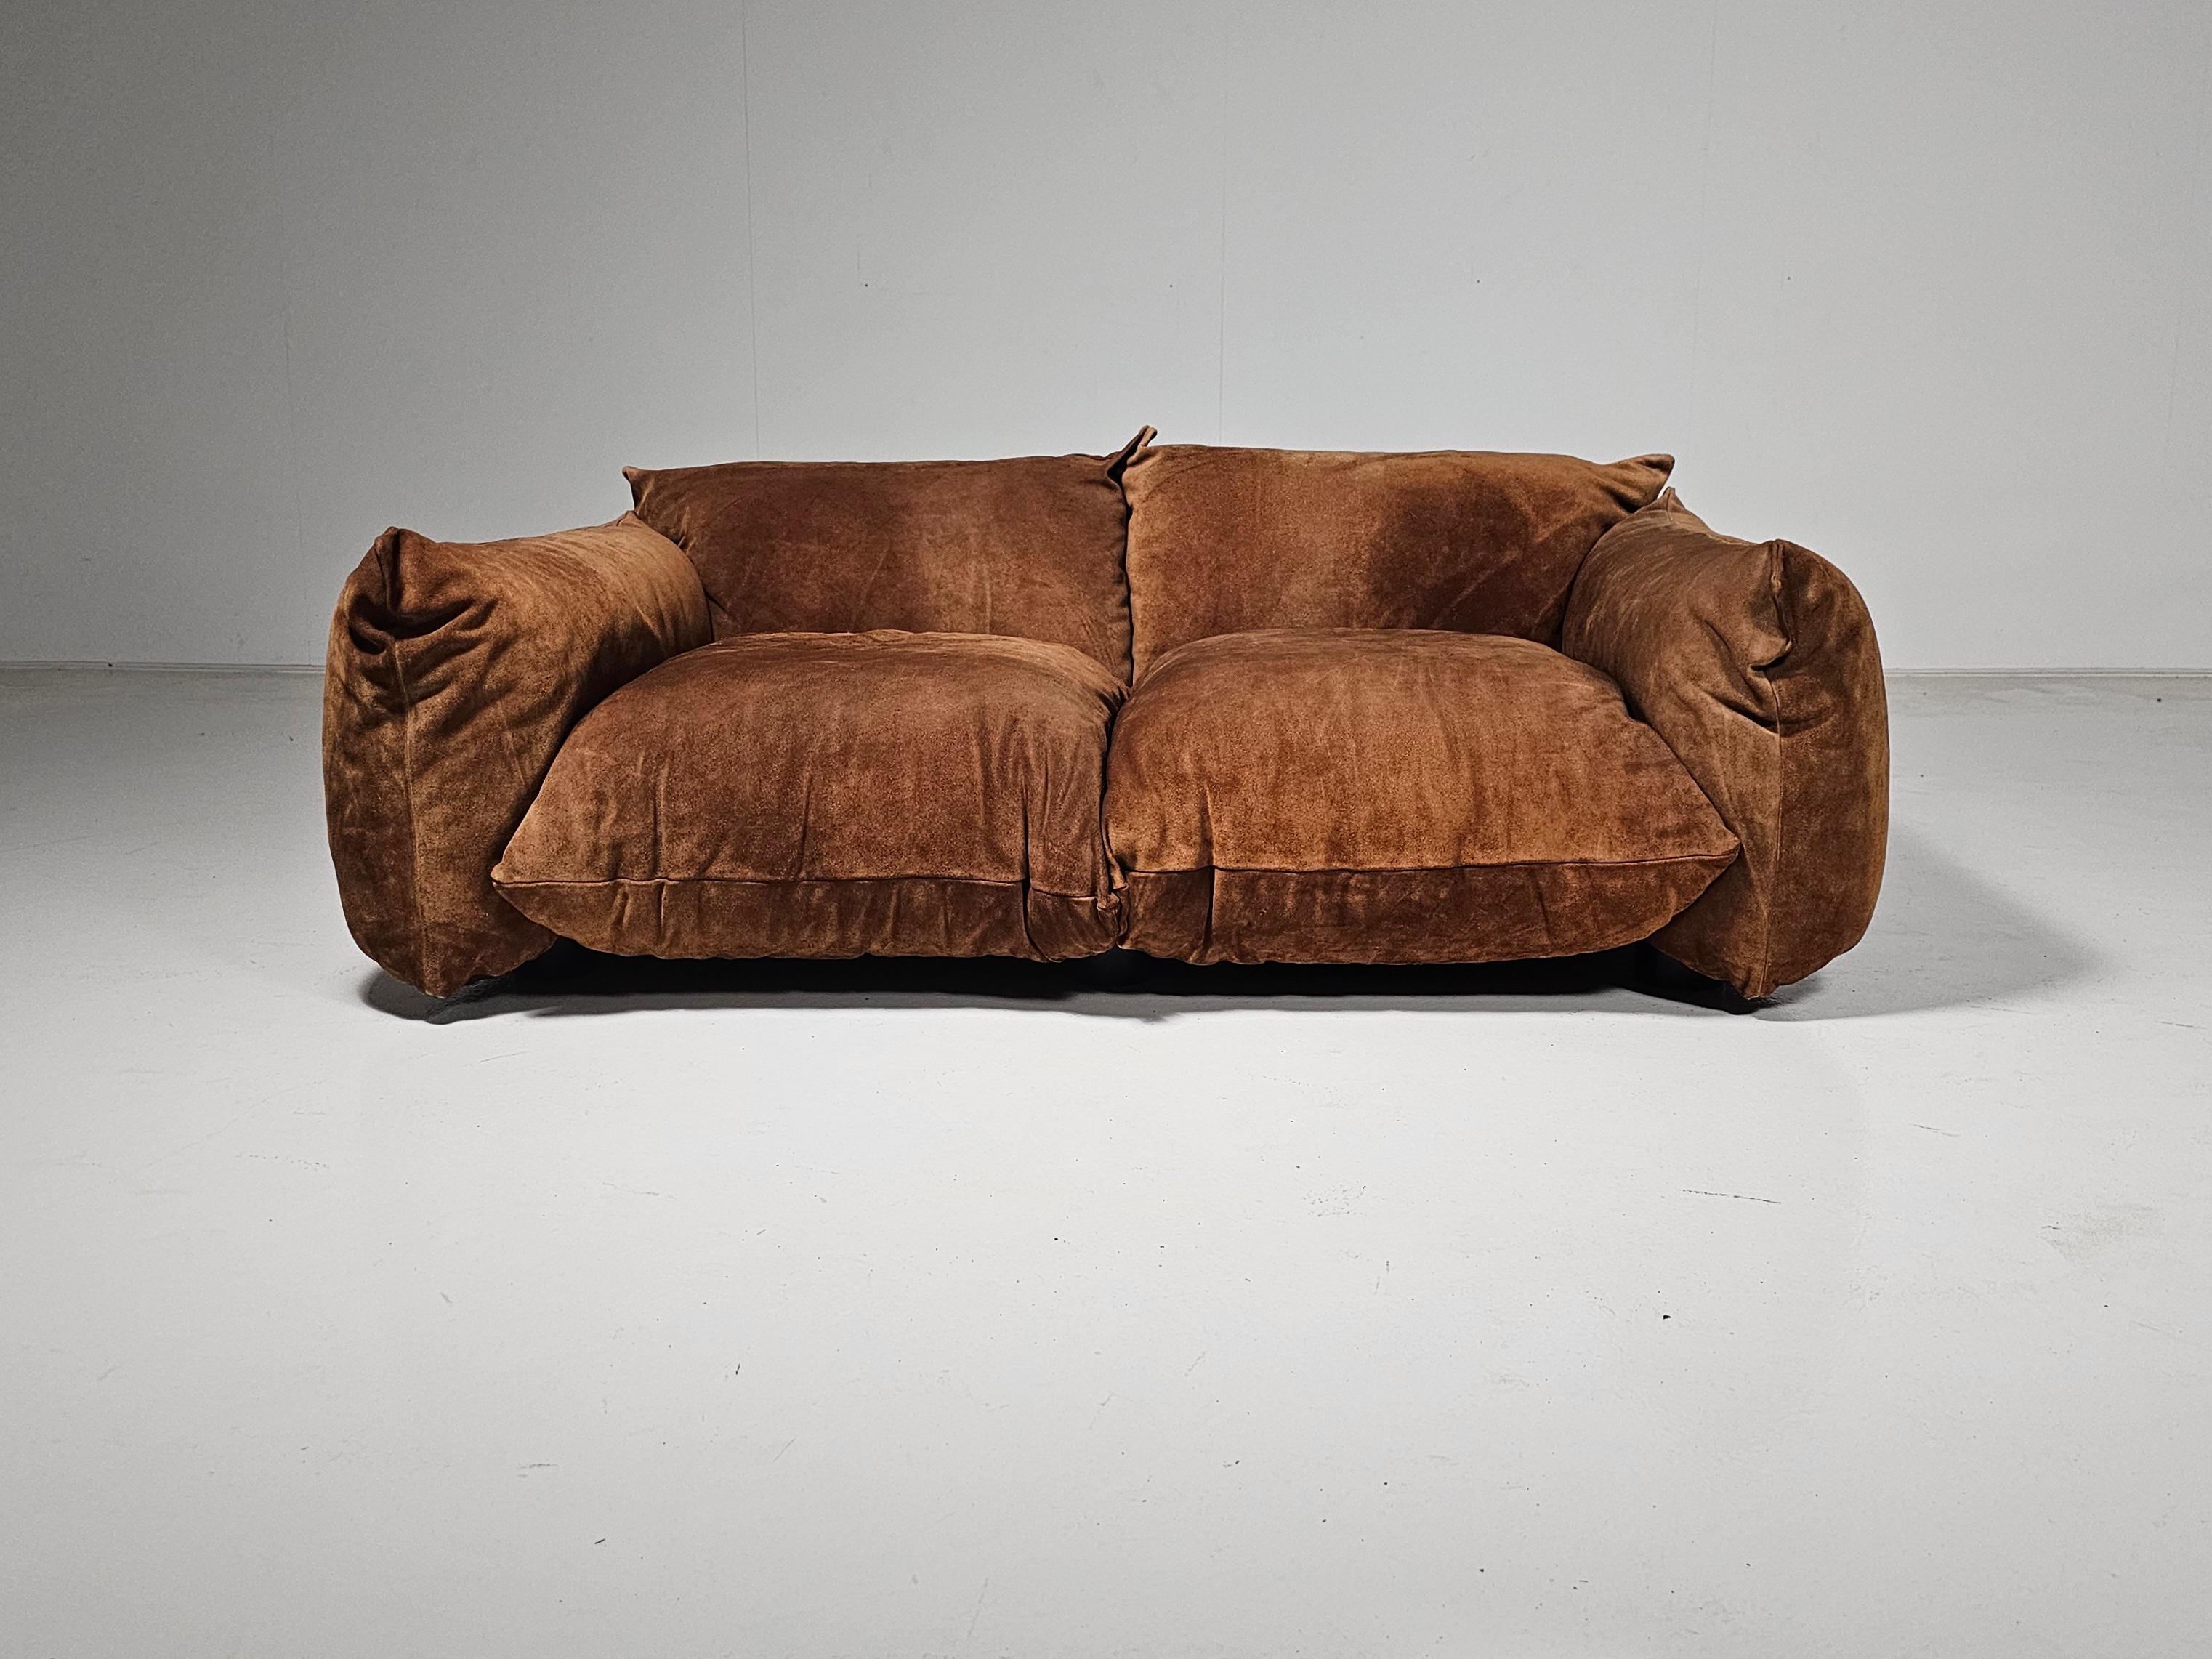 Mario Marenco for Arflex, 'Marenco' 2-seater sofa, suede, Italy, 1970

Early edition Marenco sofa designed by Mario Marenco for Arflex. It features a system that makes the armrest and seats the base portion. There is a metal tubular frame